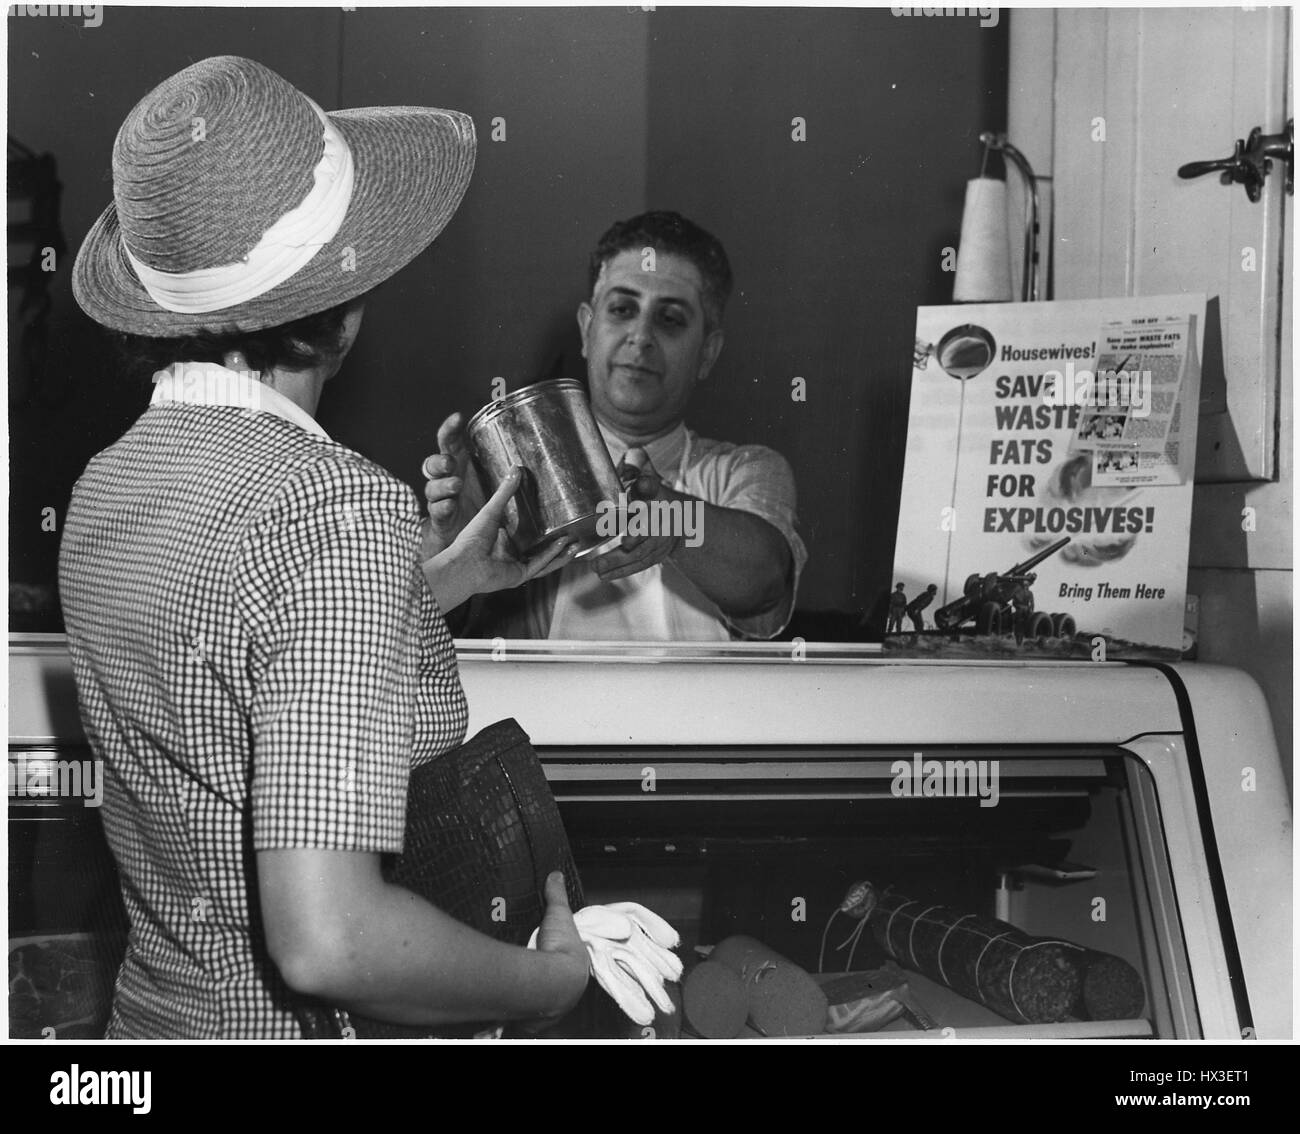 A housewife wearing a straw hat and white gloves reaches over the glass counter to hand a butcher a can of solid fat in exchange for money, after which it will be processed into ammunition for America's World War II efforts, 1942. Stock Photo